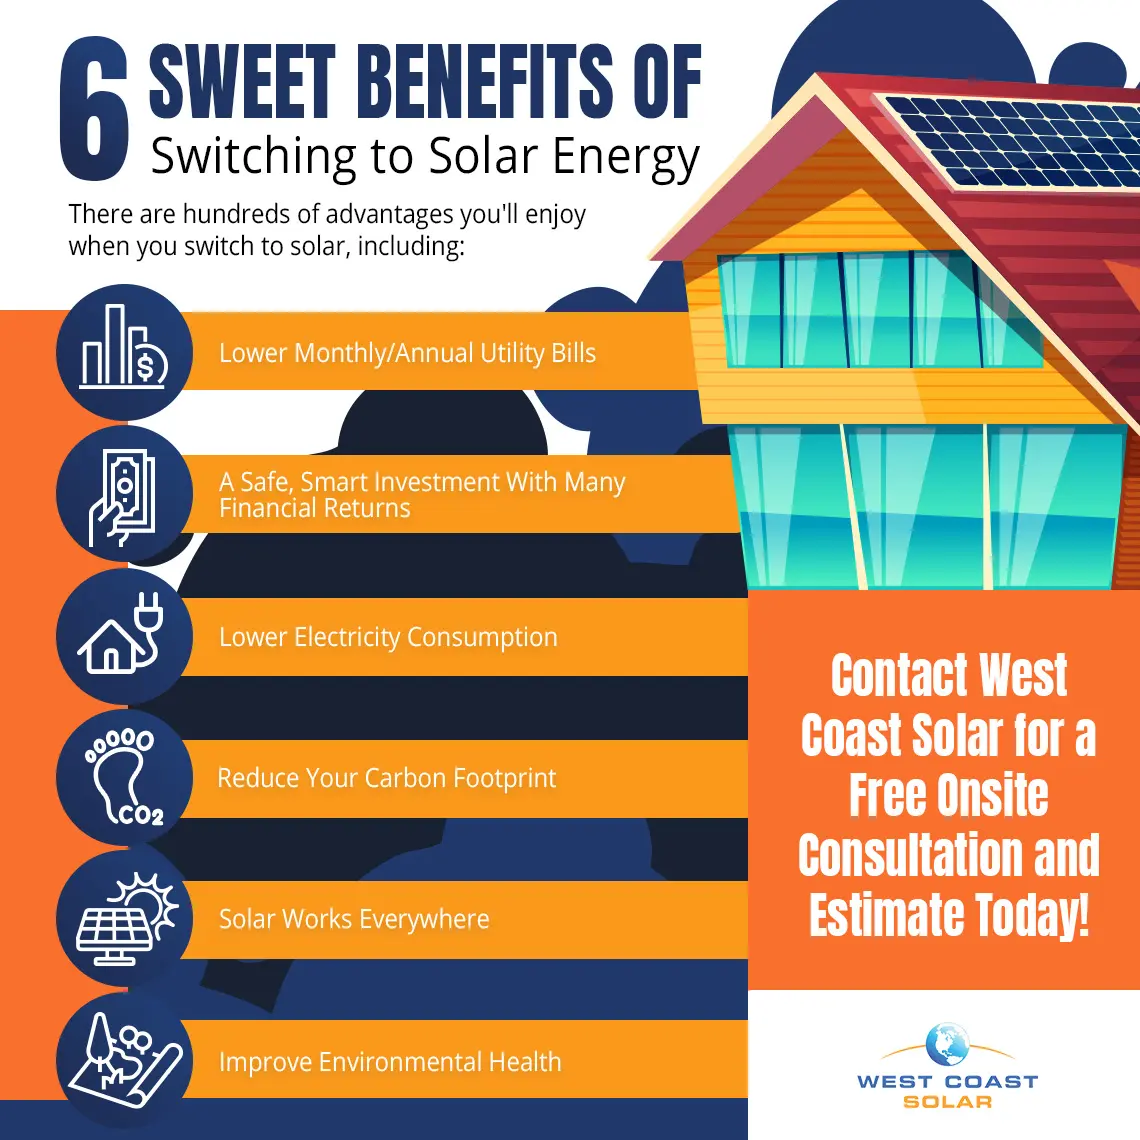 benefits of solar panels at home - What are the benefits of solar panels